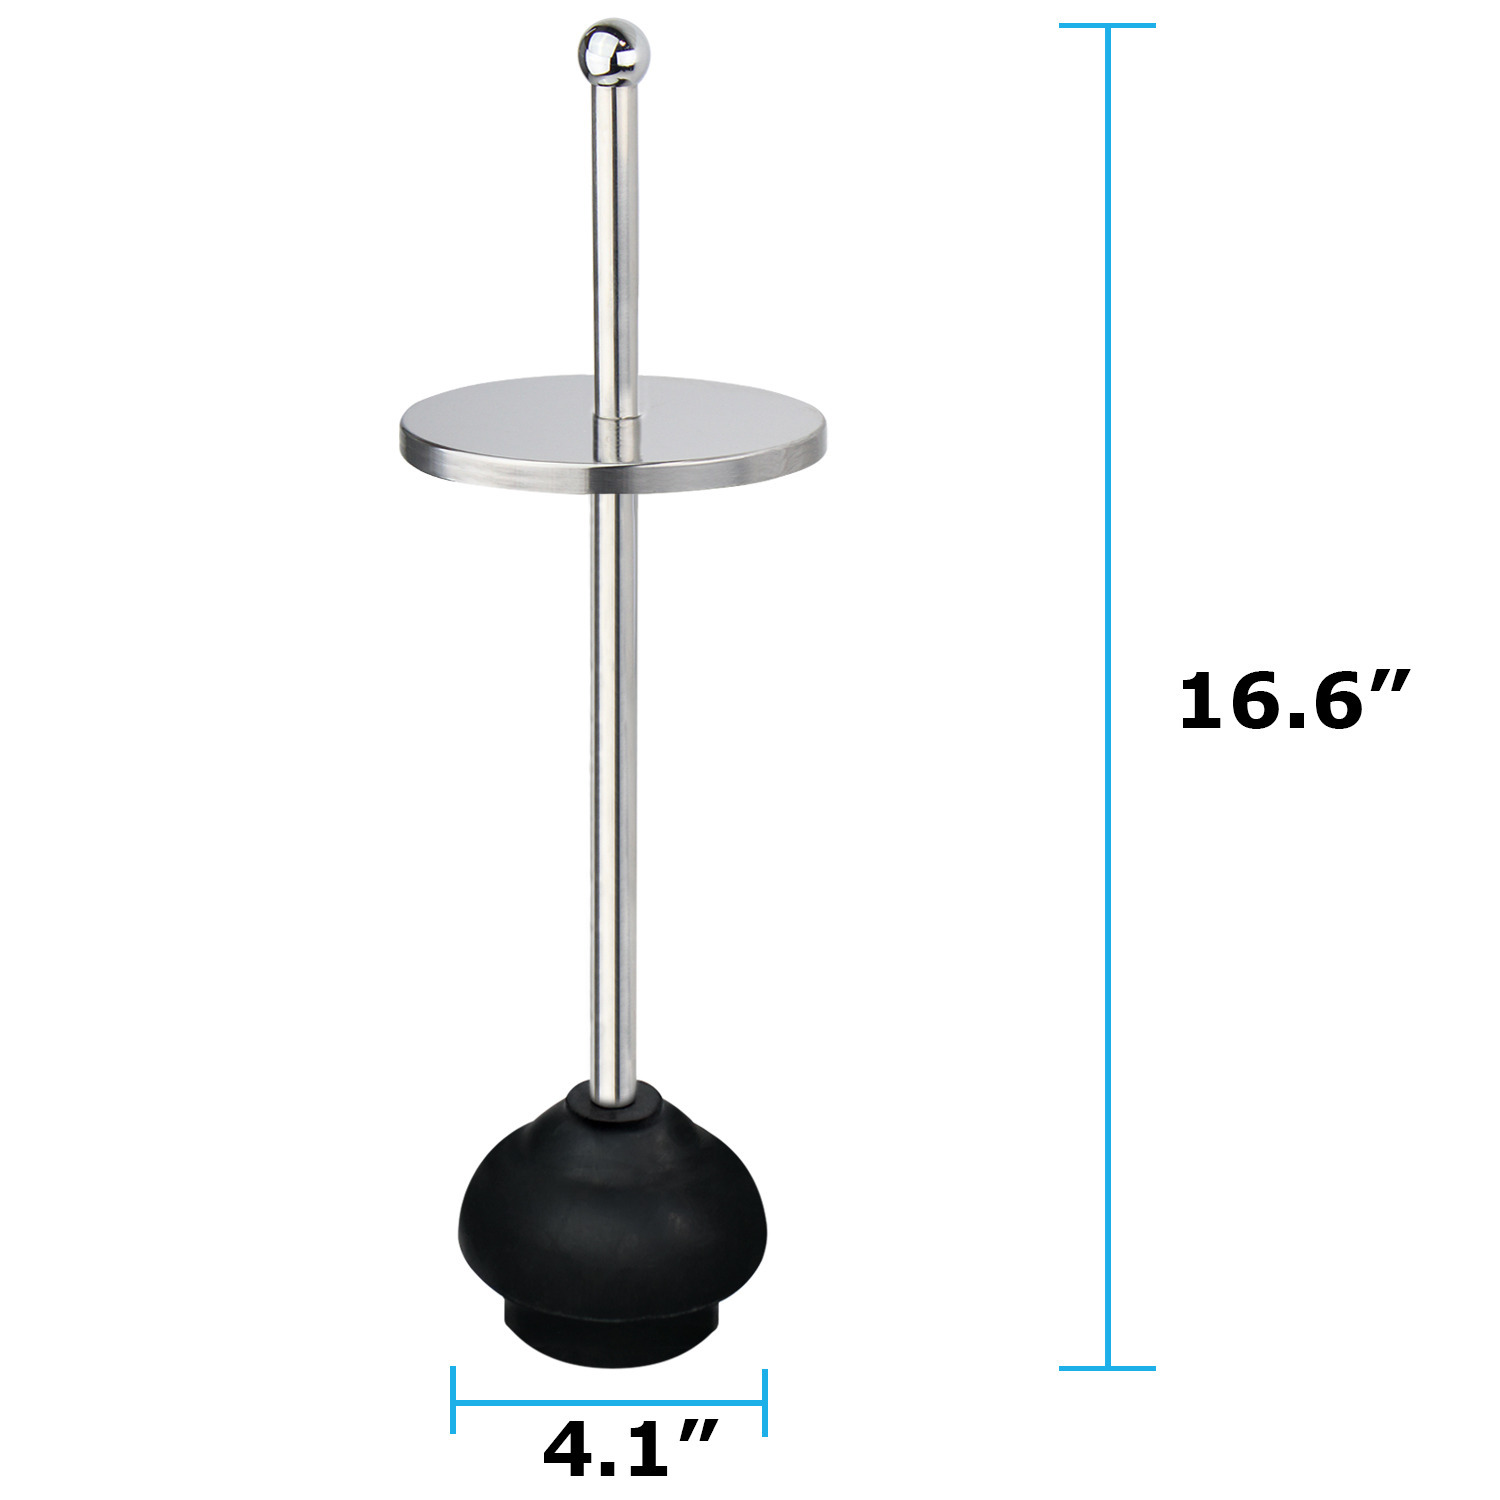 Toilet Plunger with Holder for Bathroom, Multi Drain Suitable also for Bathtubs, Quick Dry, Chrome